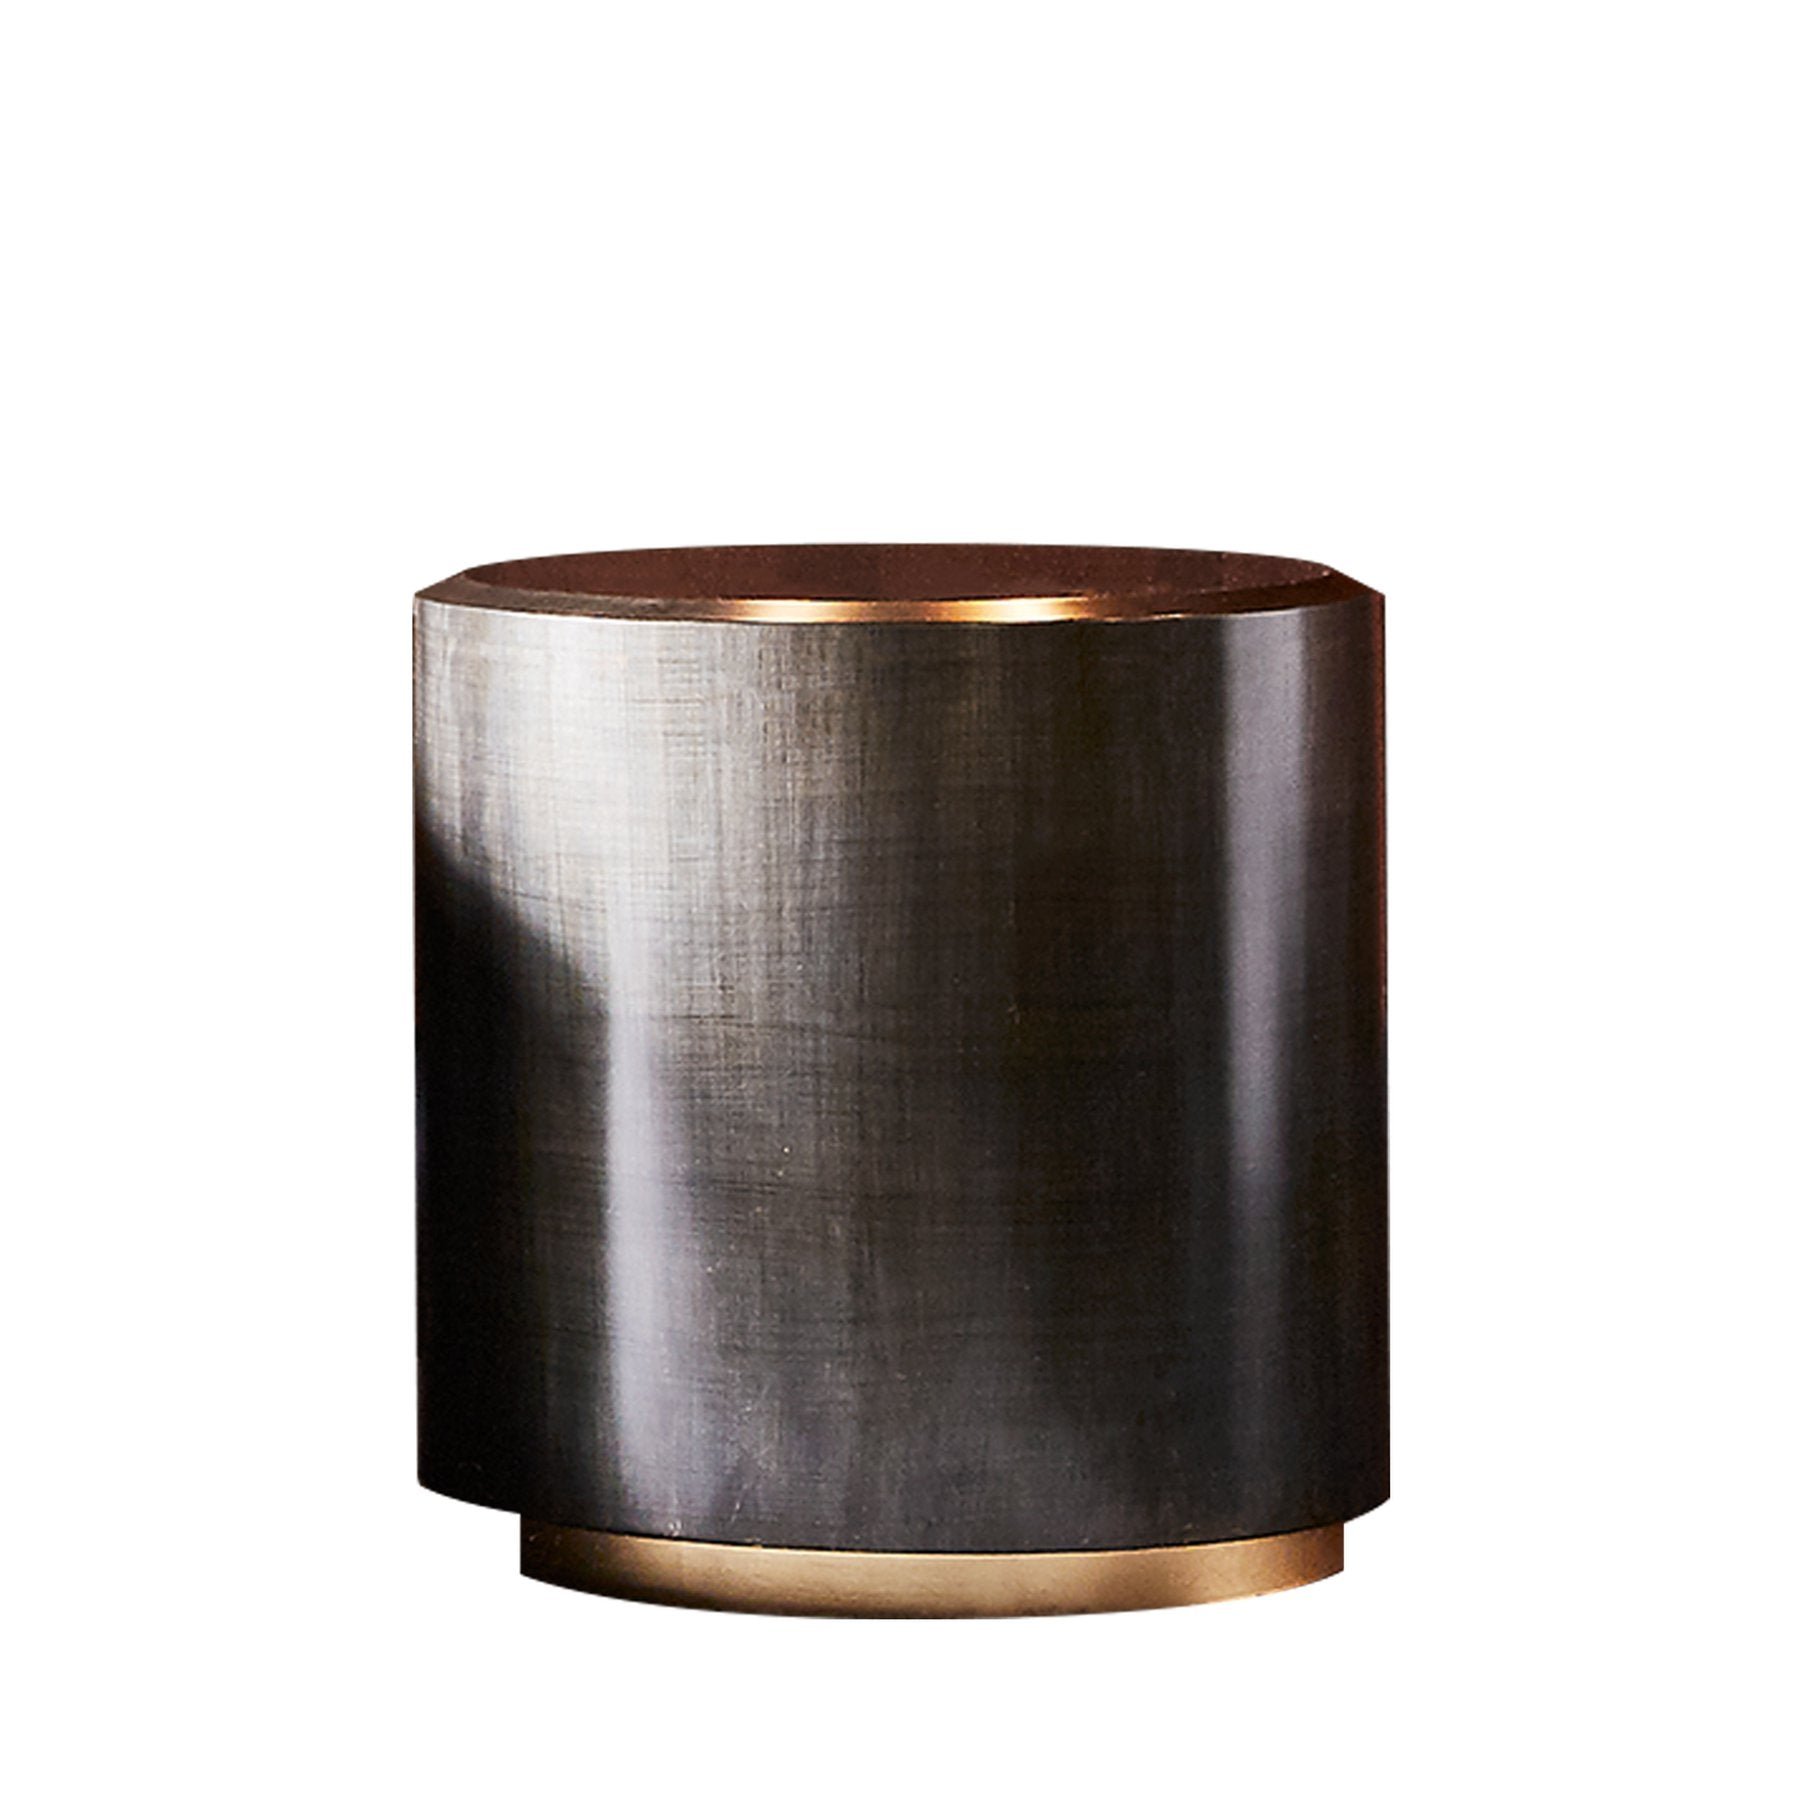 Gong Side Table